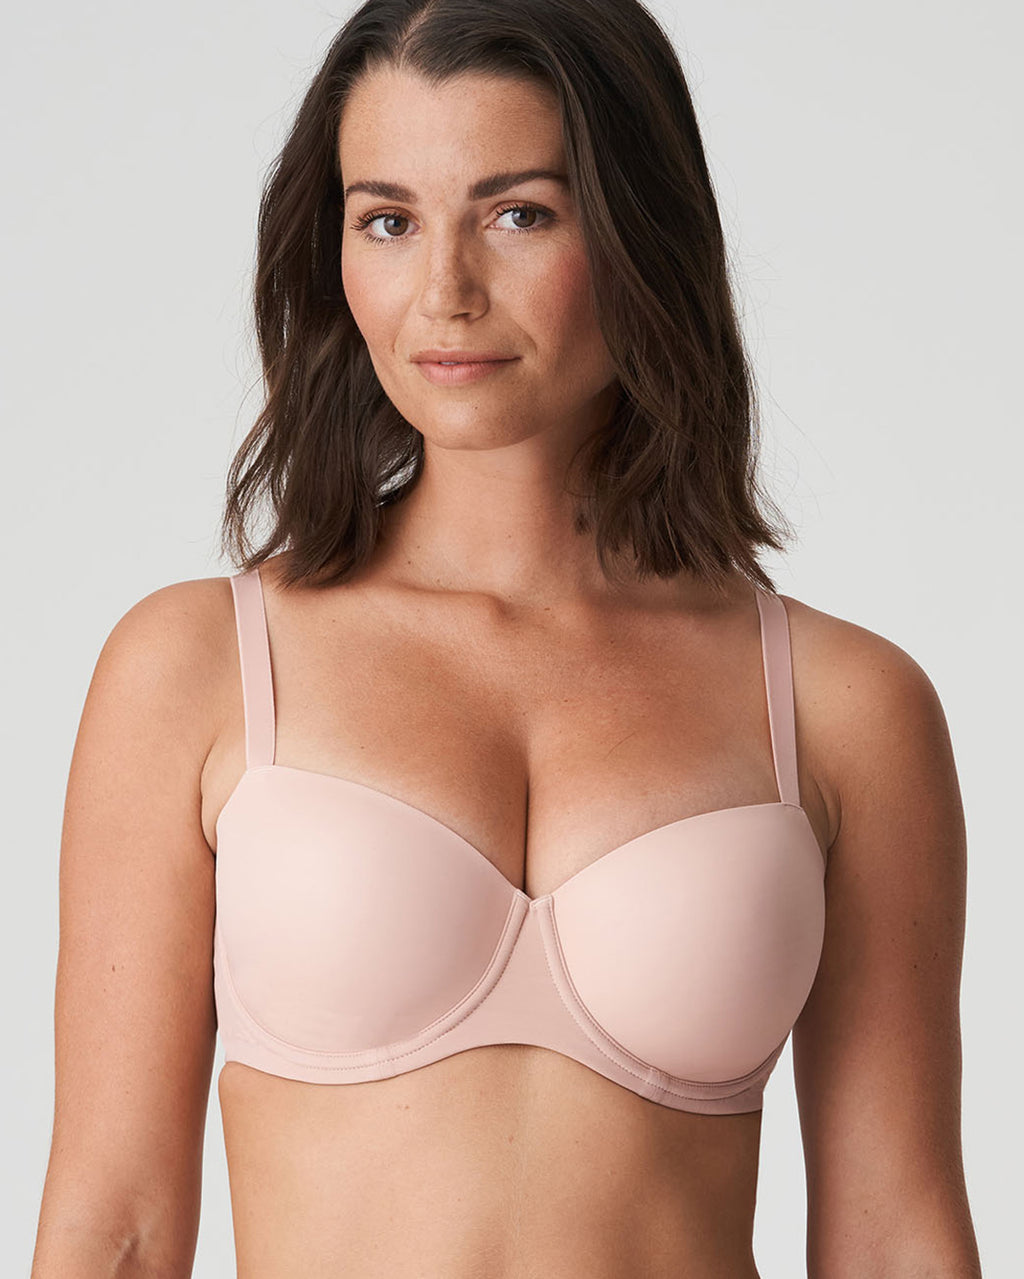 PRIMA DONNA – Specialty Fittings Lingerie